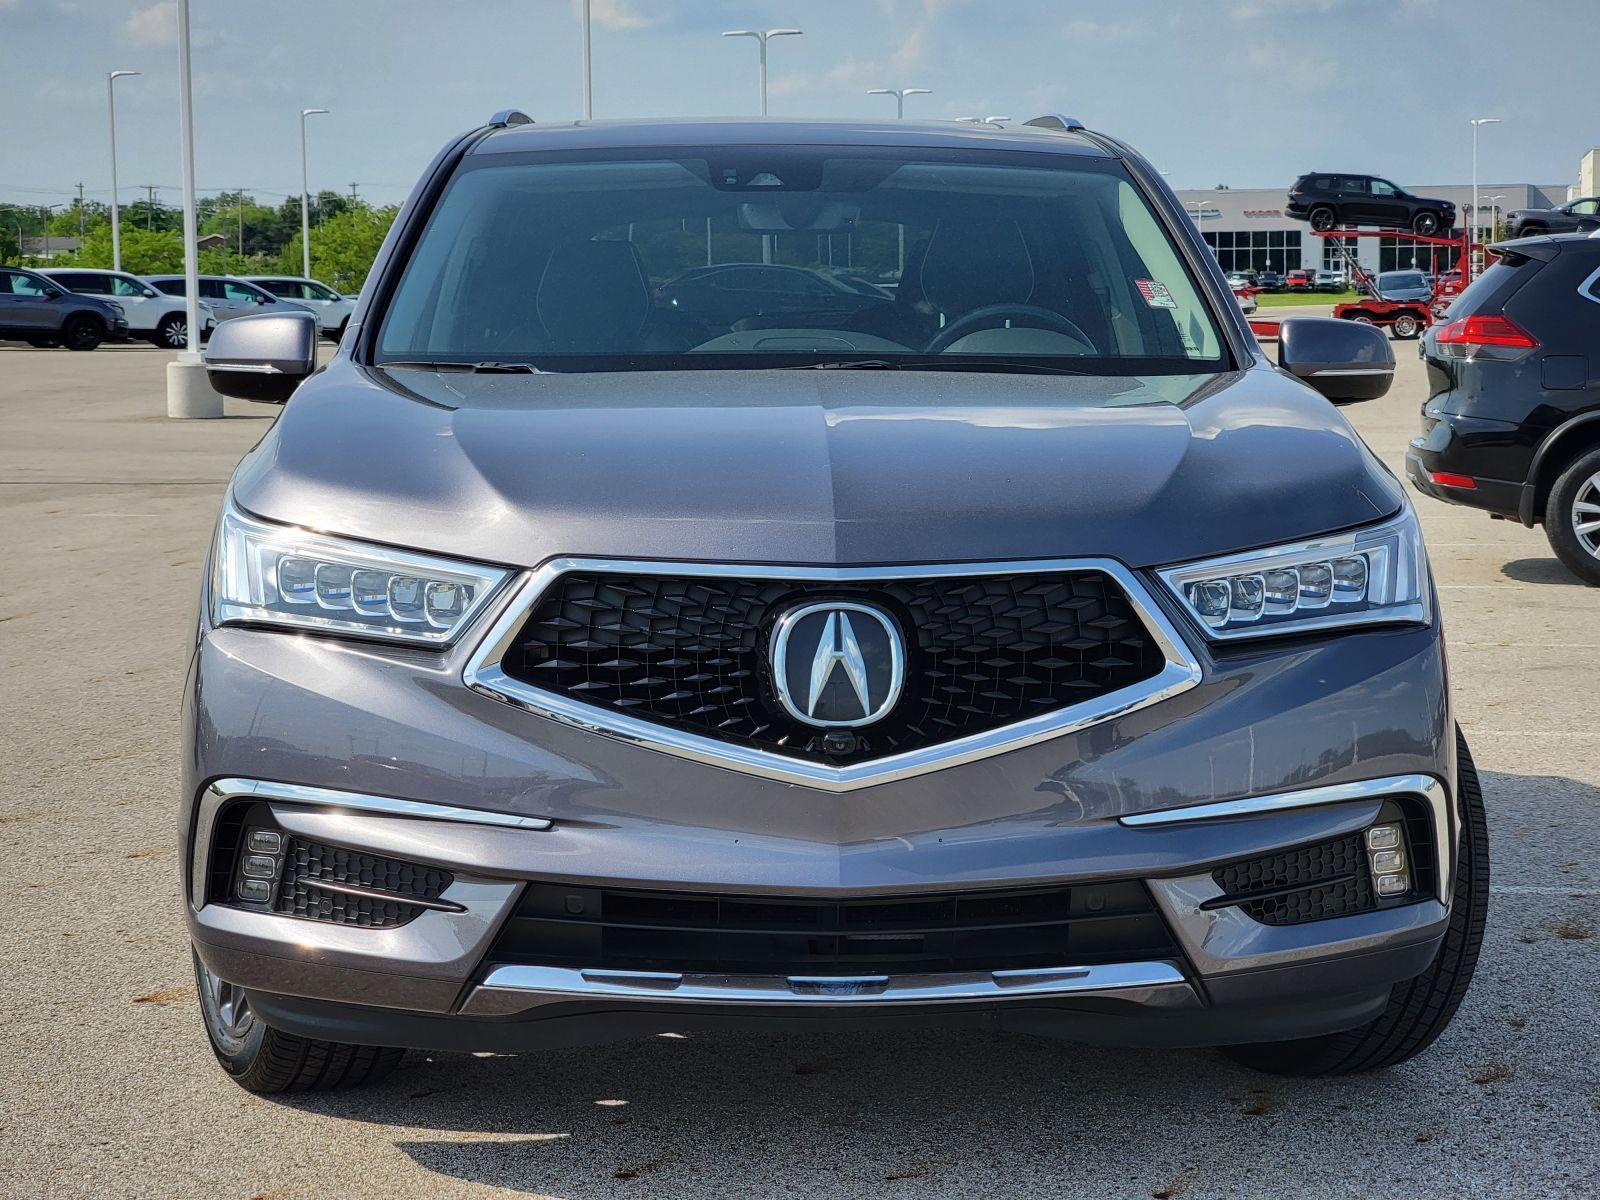 Used, 2020 Acura MDX Advance, Gray, G0653A-10